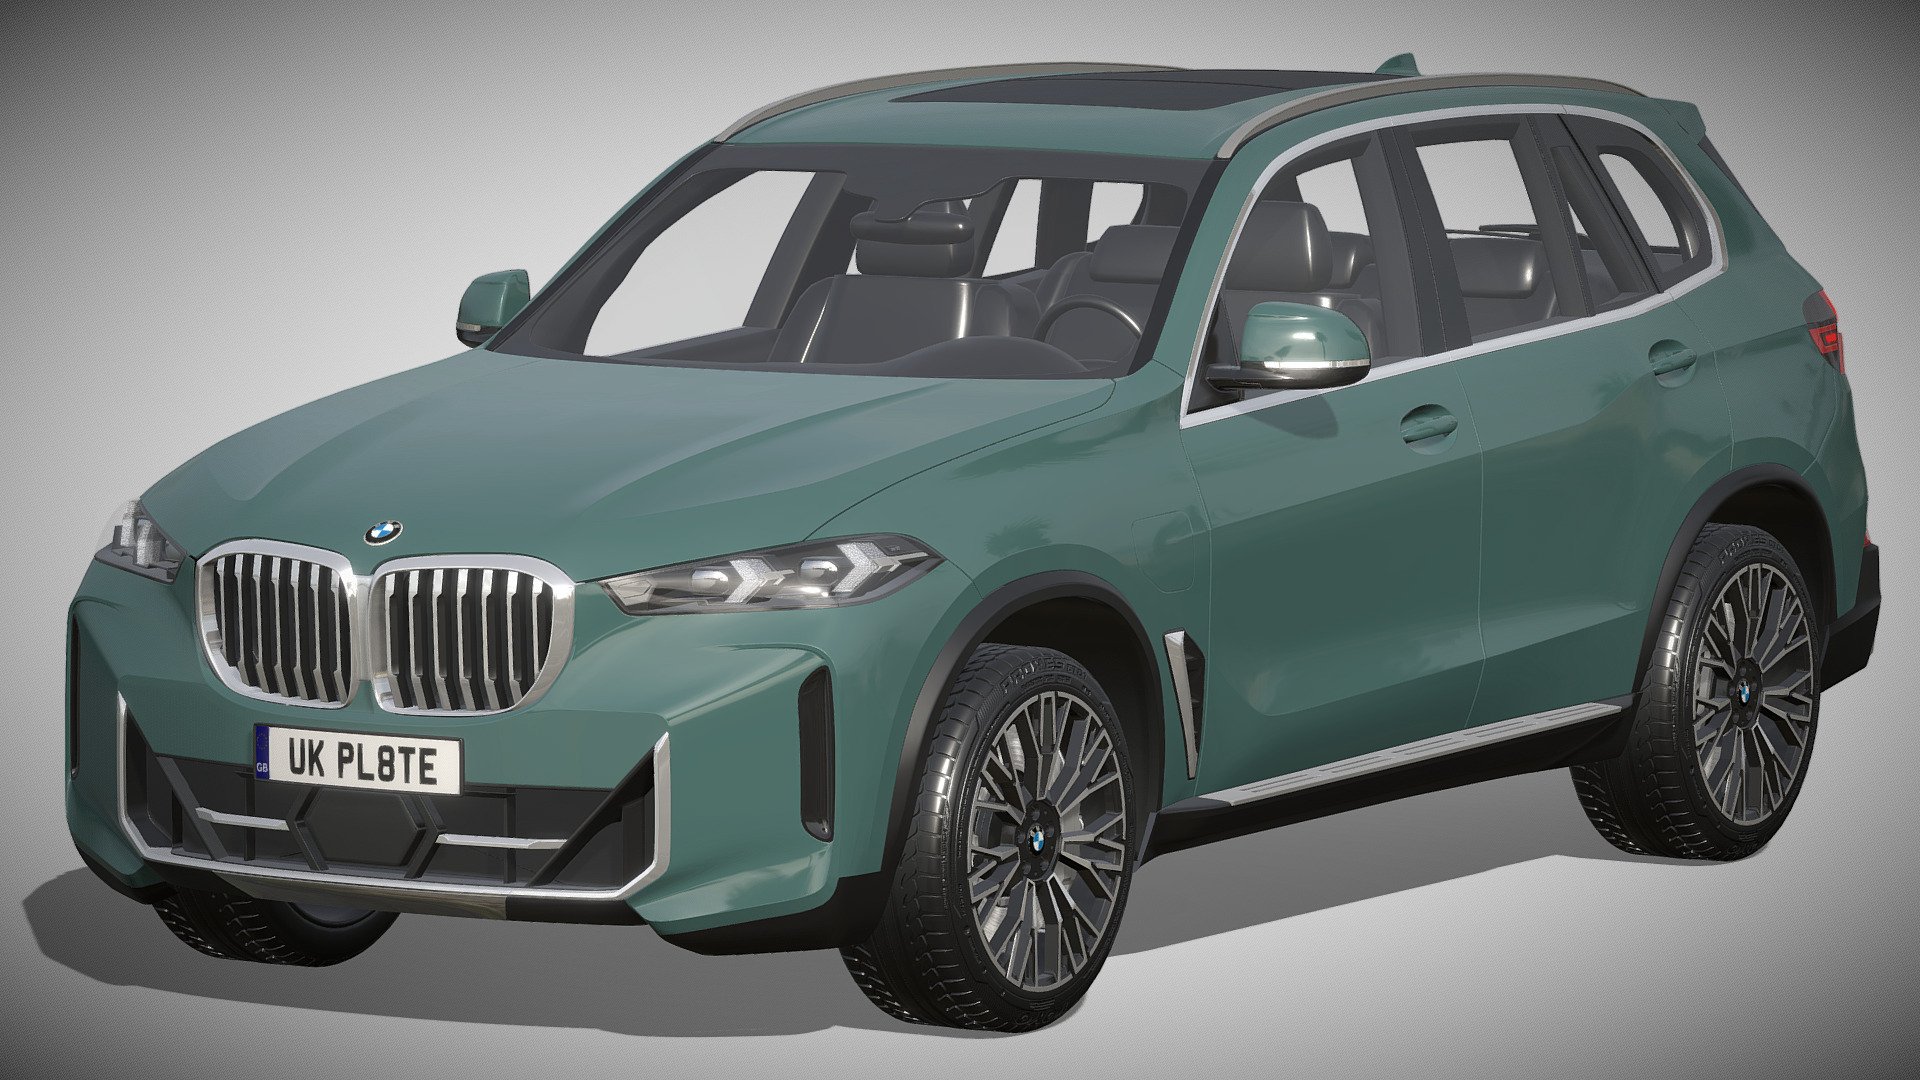 BMW X5 2023

https://www.bmw.de/de/neufahrzeuge/x/x5/2023/bmw-x5-ueberblick.html

Clean geometry Light weight model, yet completely detailed for HI-Res renders. Use for movies, Advertisements or games

Corona render and materials

All textures include in *.rar files

Lighting setup is not included in the file! - BMW X5 2023 - Buy Royalty Free 3D model by zifir3d 3d model